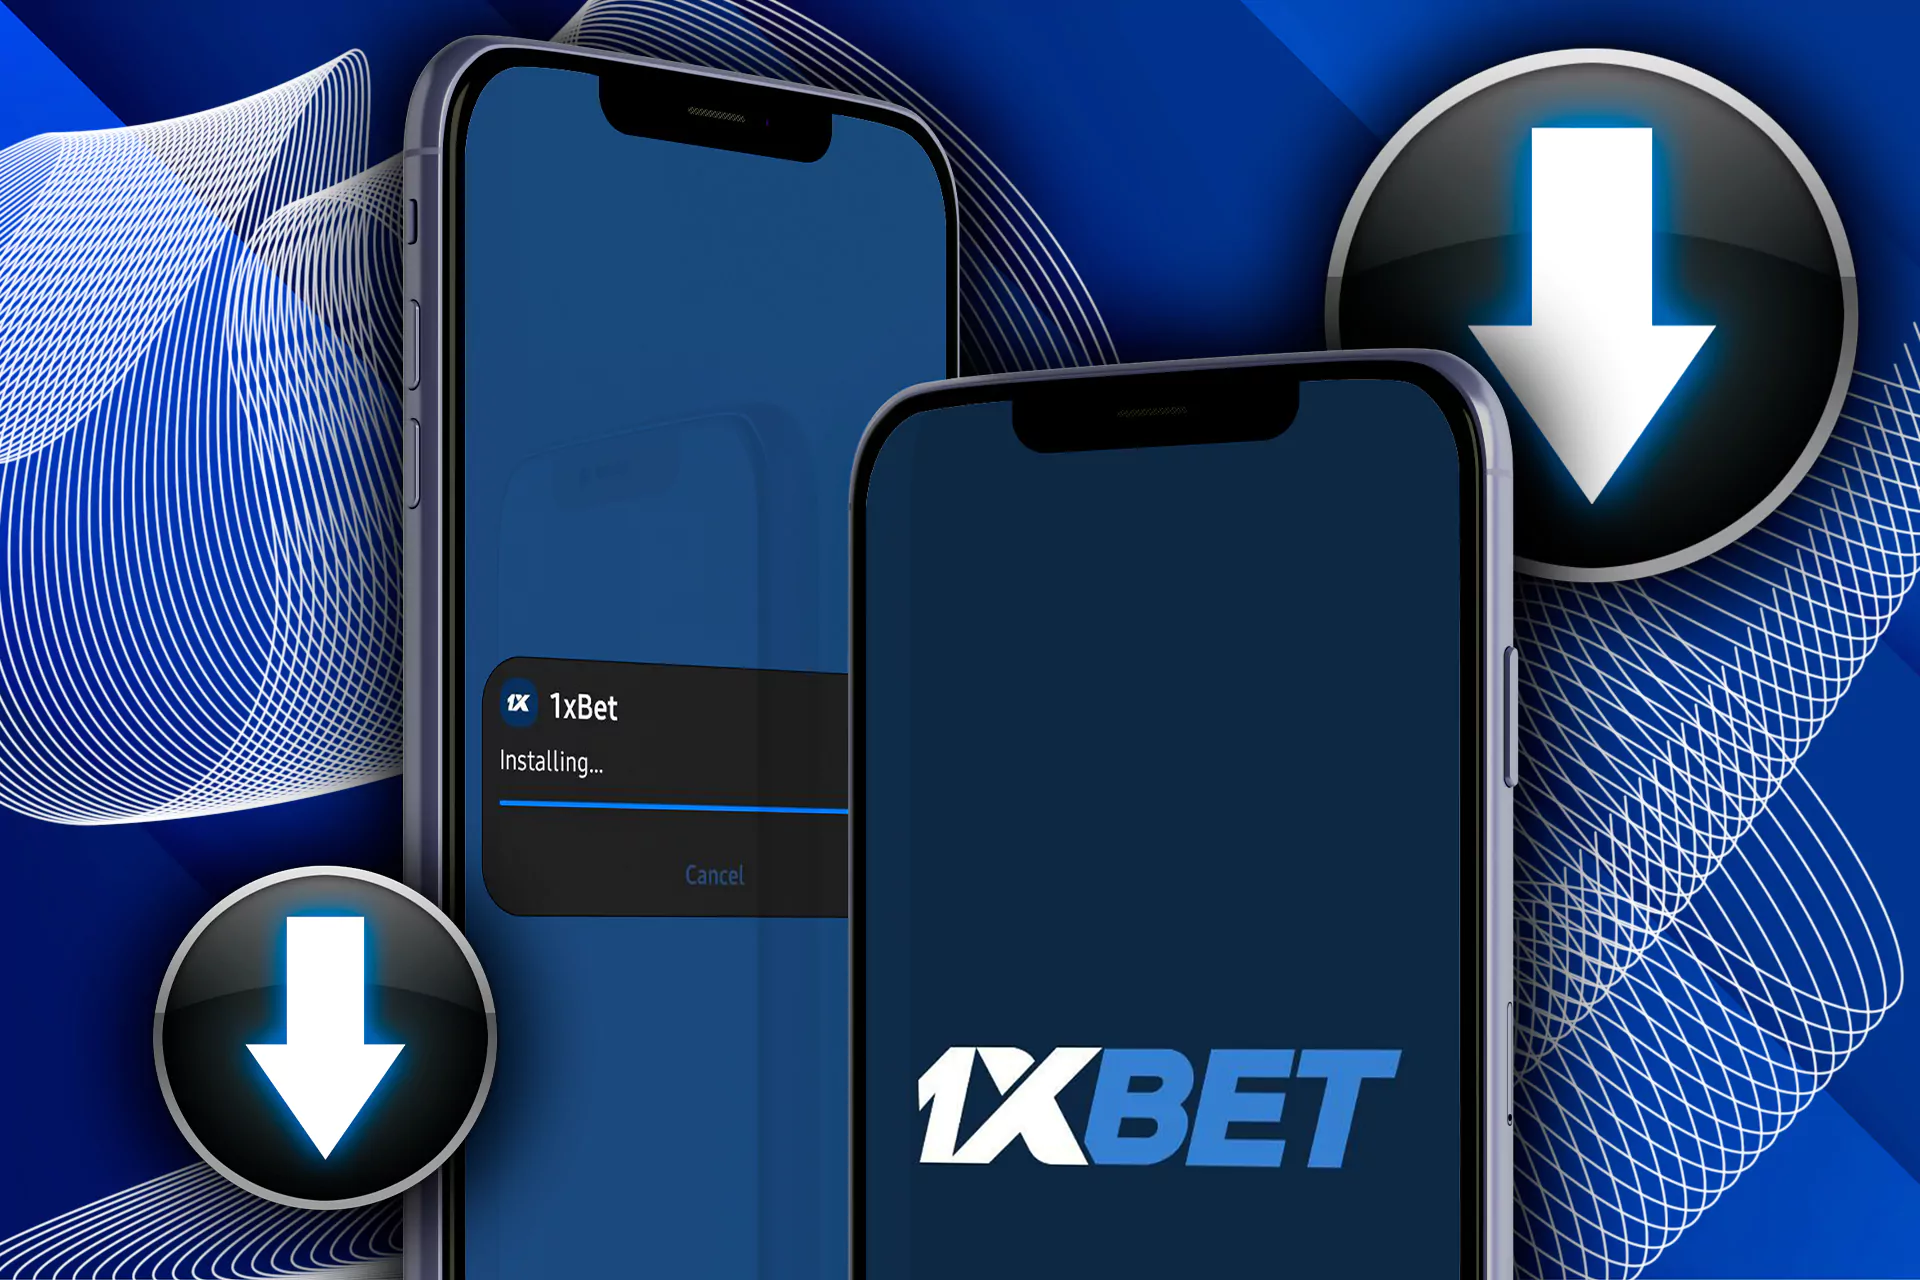 Download and install the 1xBet app on your iPhone or iPad.